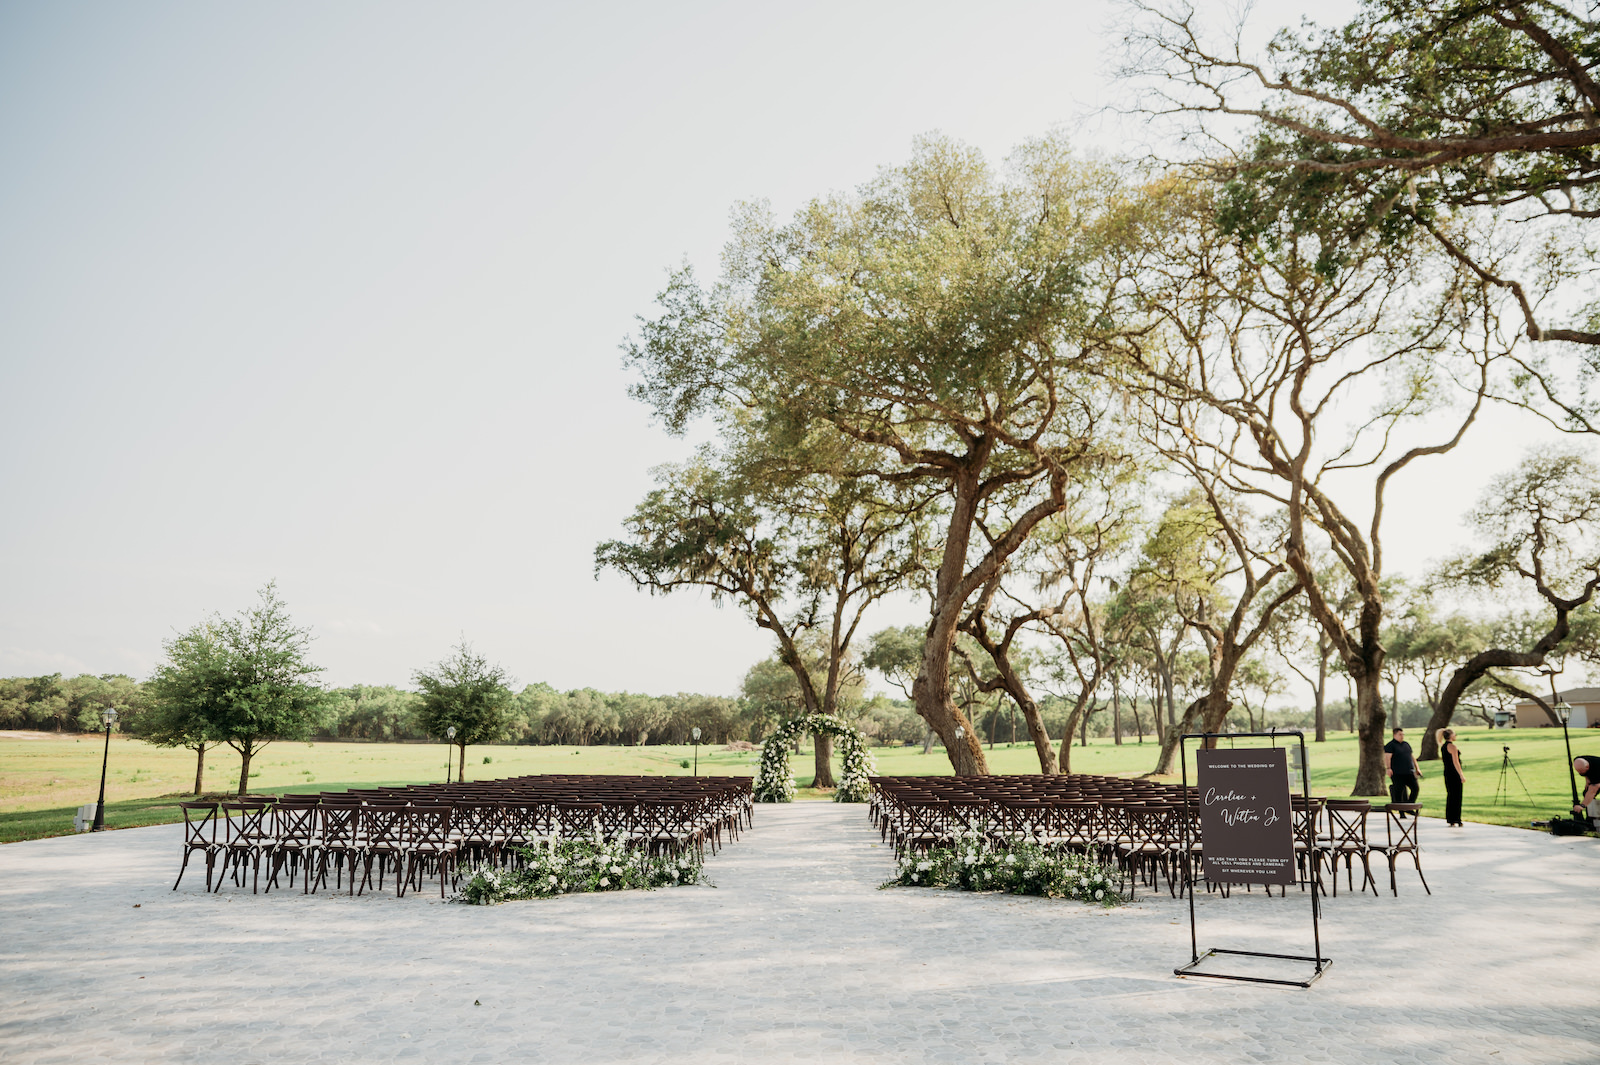 Classic Outdoor Wedding Ceremony Decor, Greenery and White Floral Arch | Tampa Bay Rustic Wedding Venue Simpson Lakes